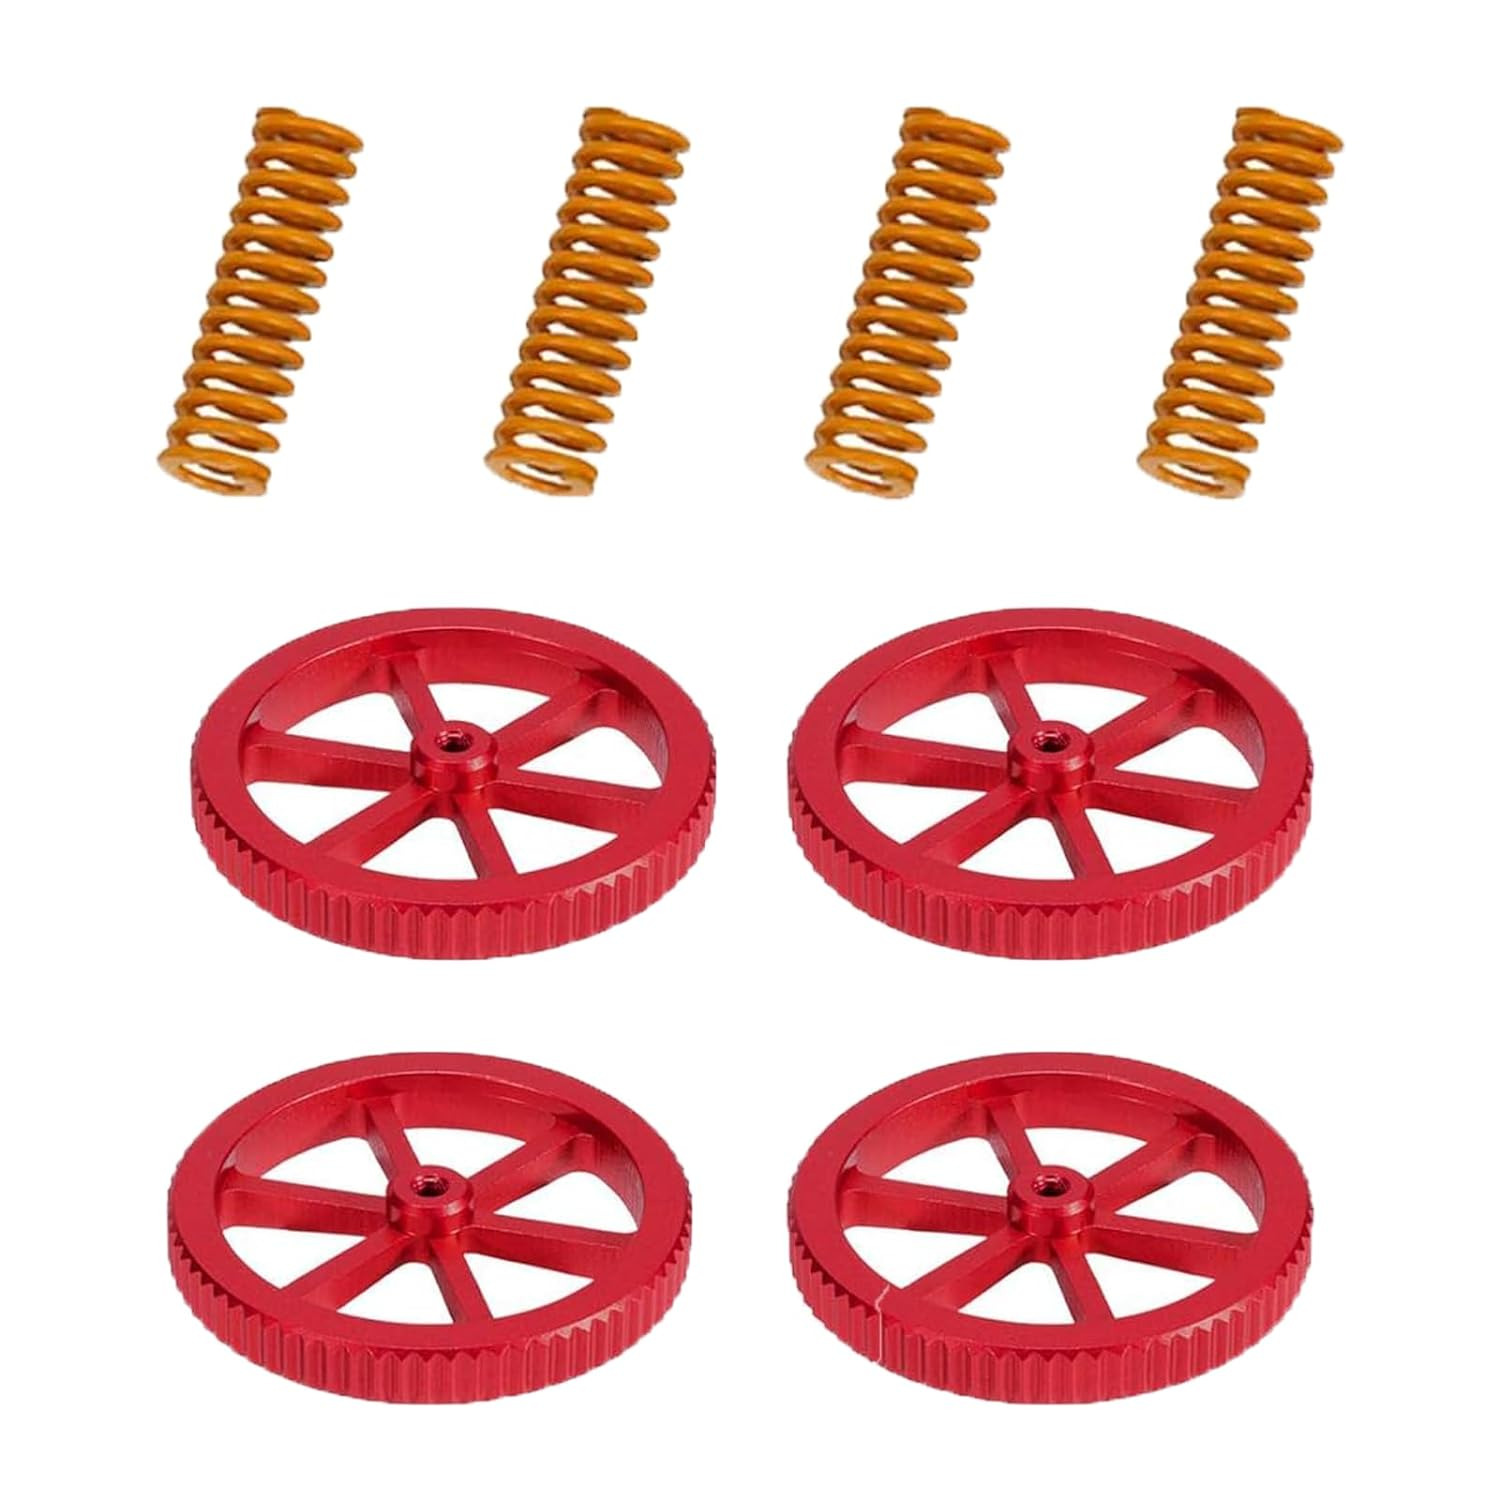 Creality Metal Leveling Nuts and Springs Upgrade for Ender 3 V2 Ender 5 Plus